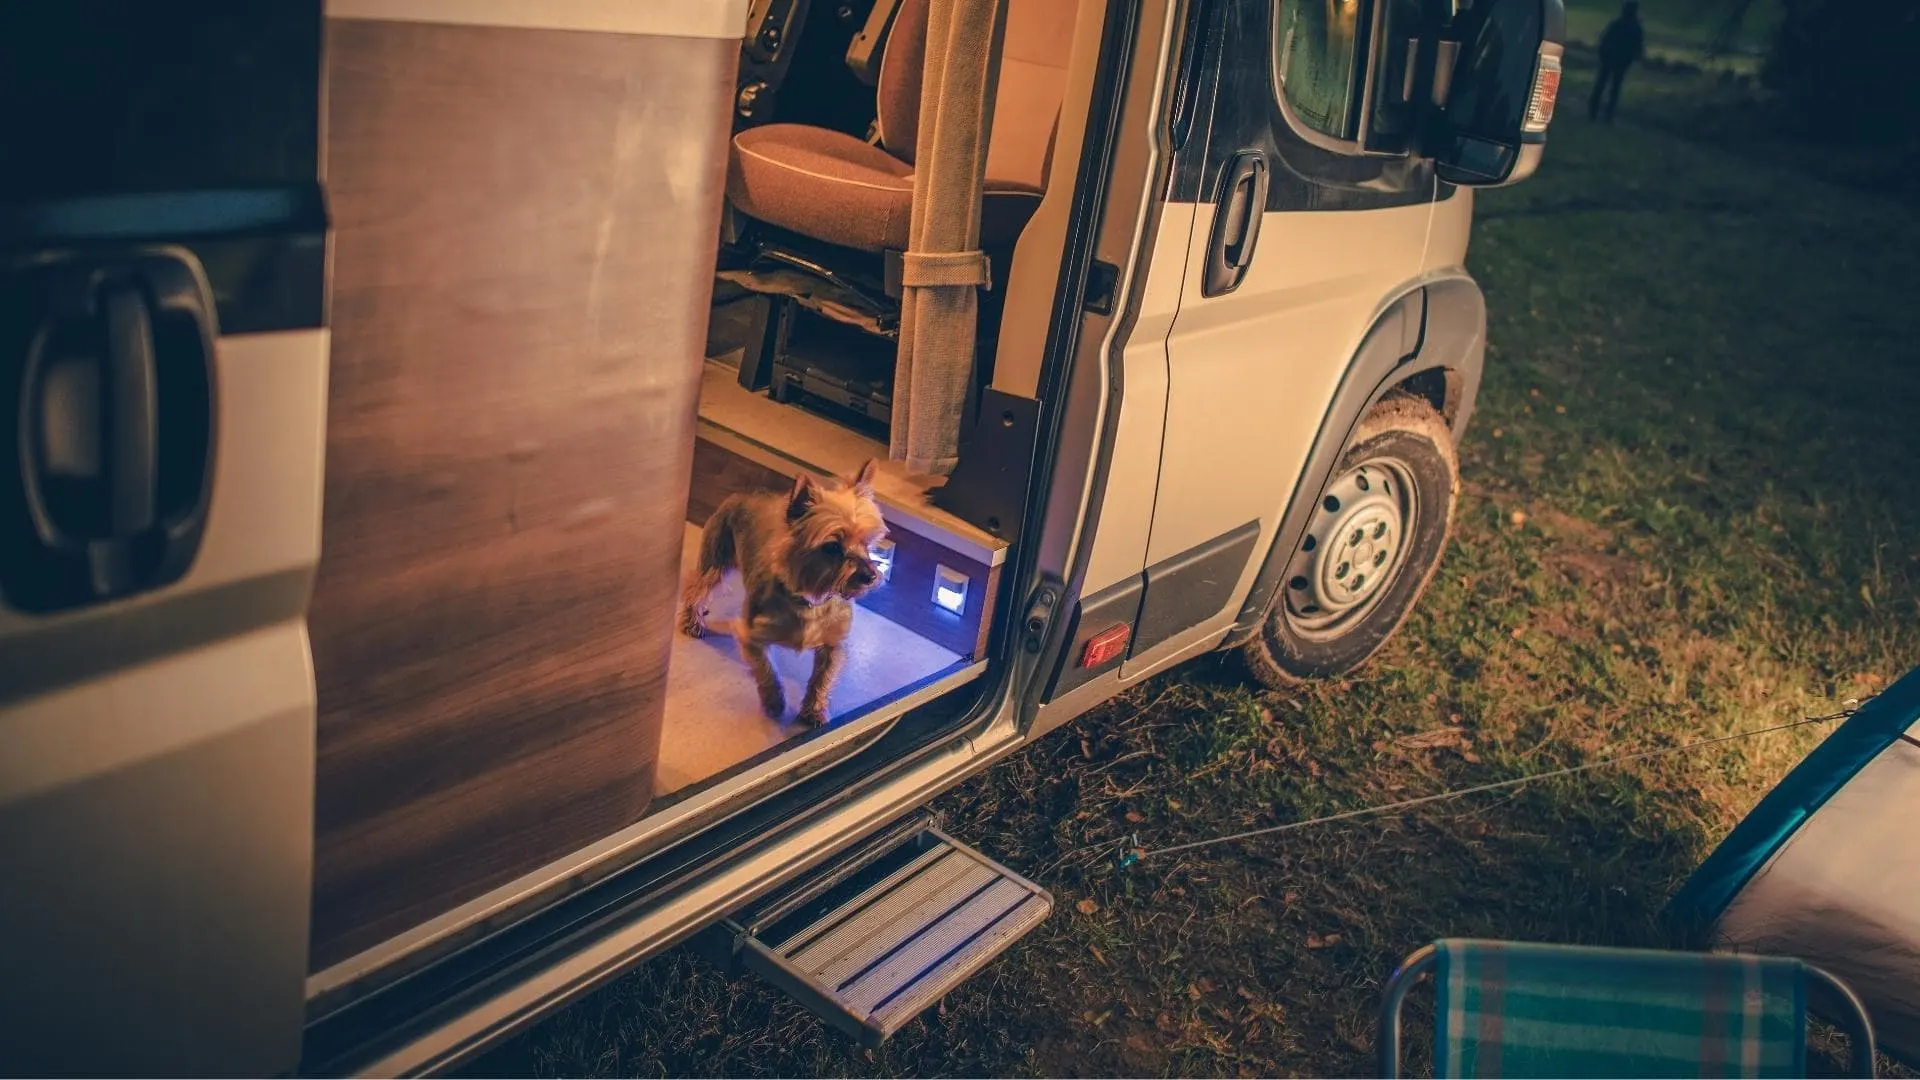 Small dogs can have difficulty exiting or entering without an RV dog ramp.